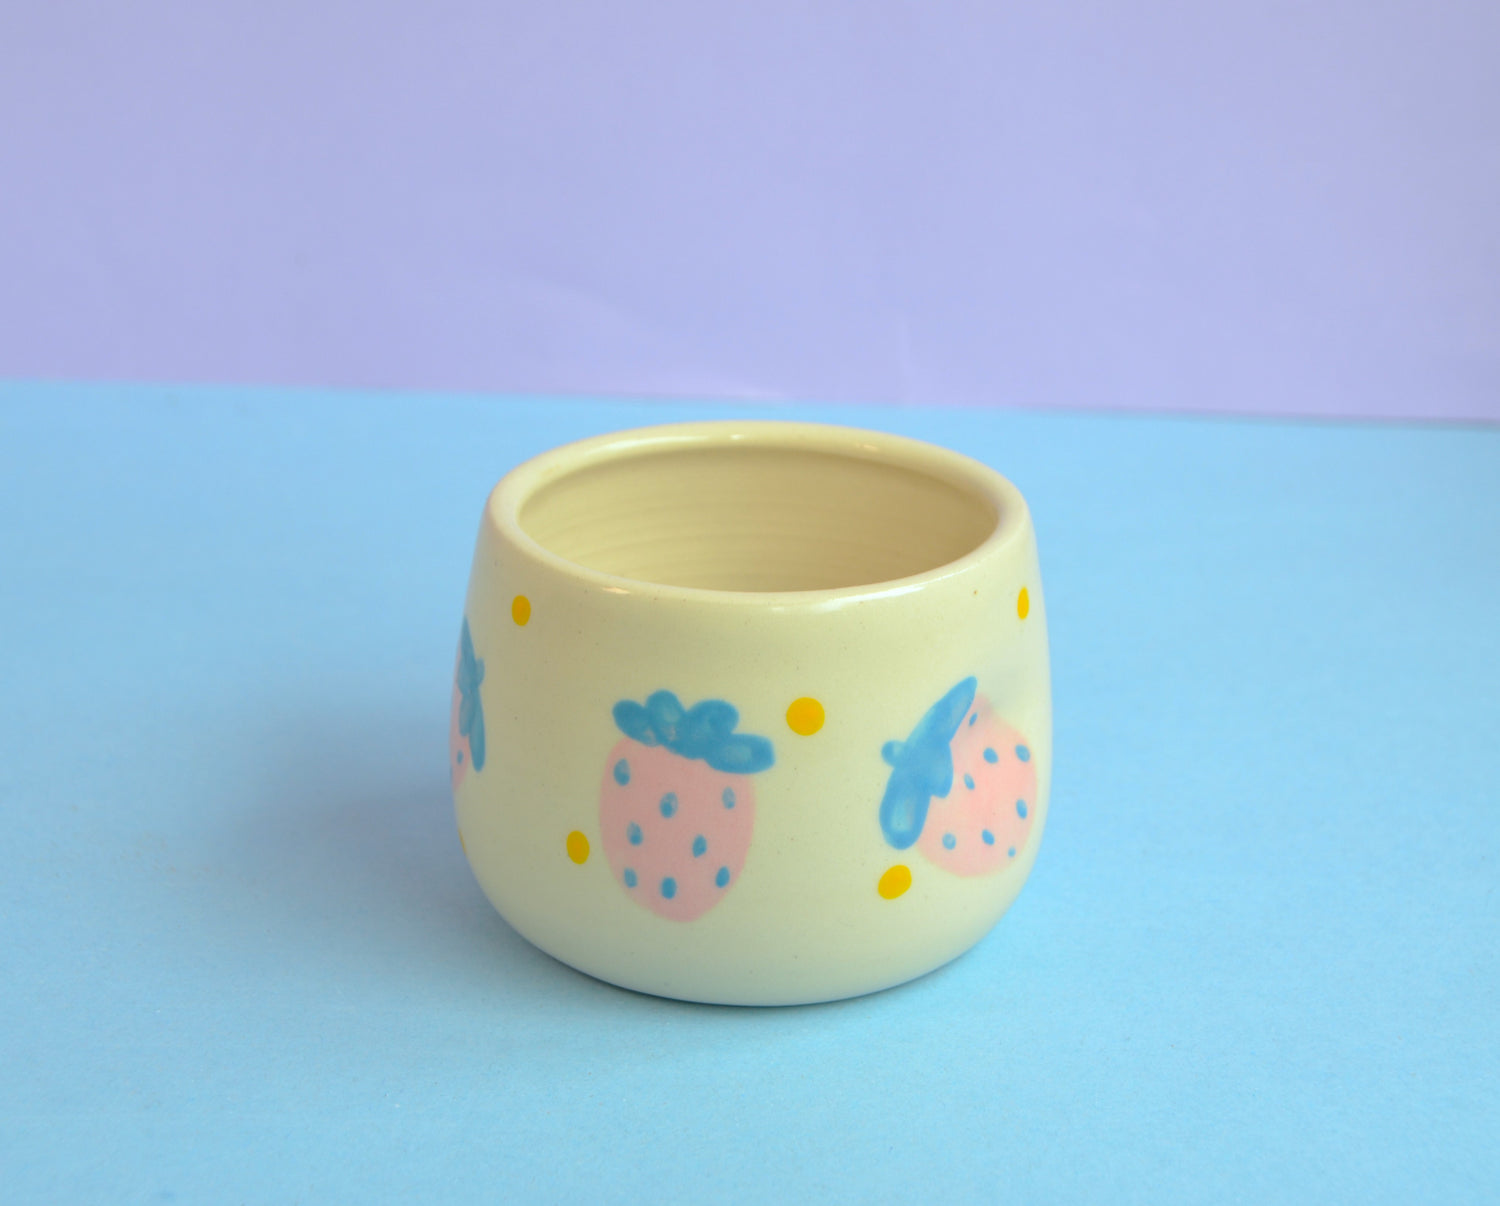 ceramic cup with yellow dots and light pink strawberries with light blue leaves. Cup features an indented side for a comfortable grip